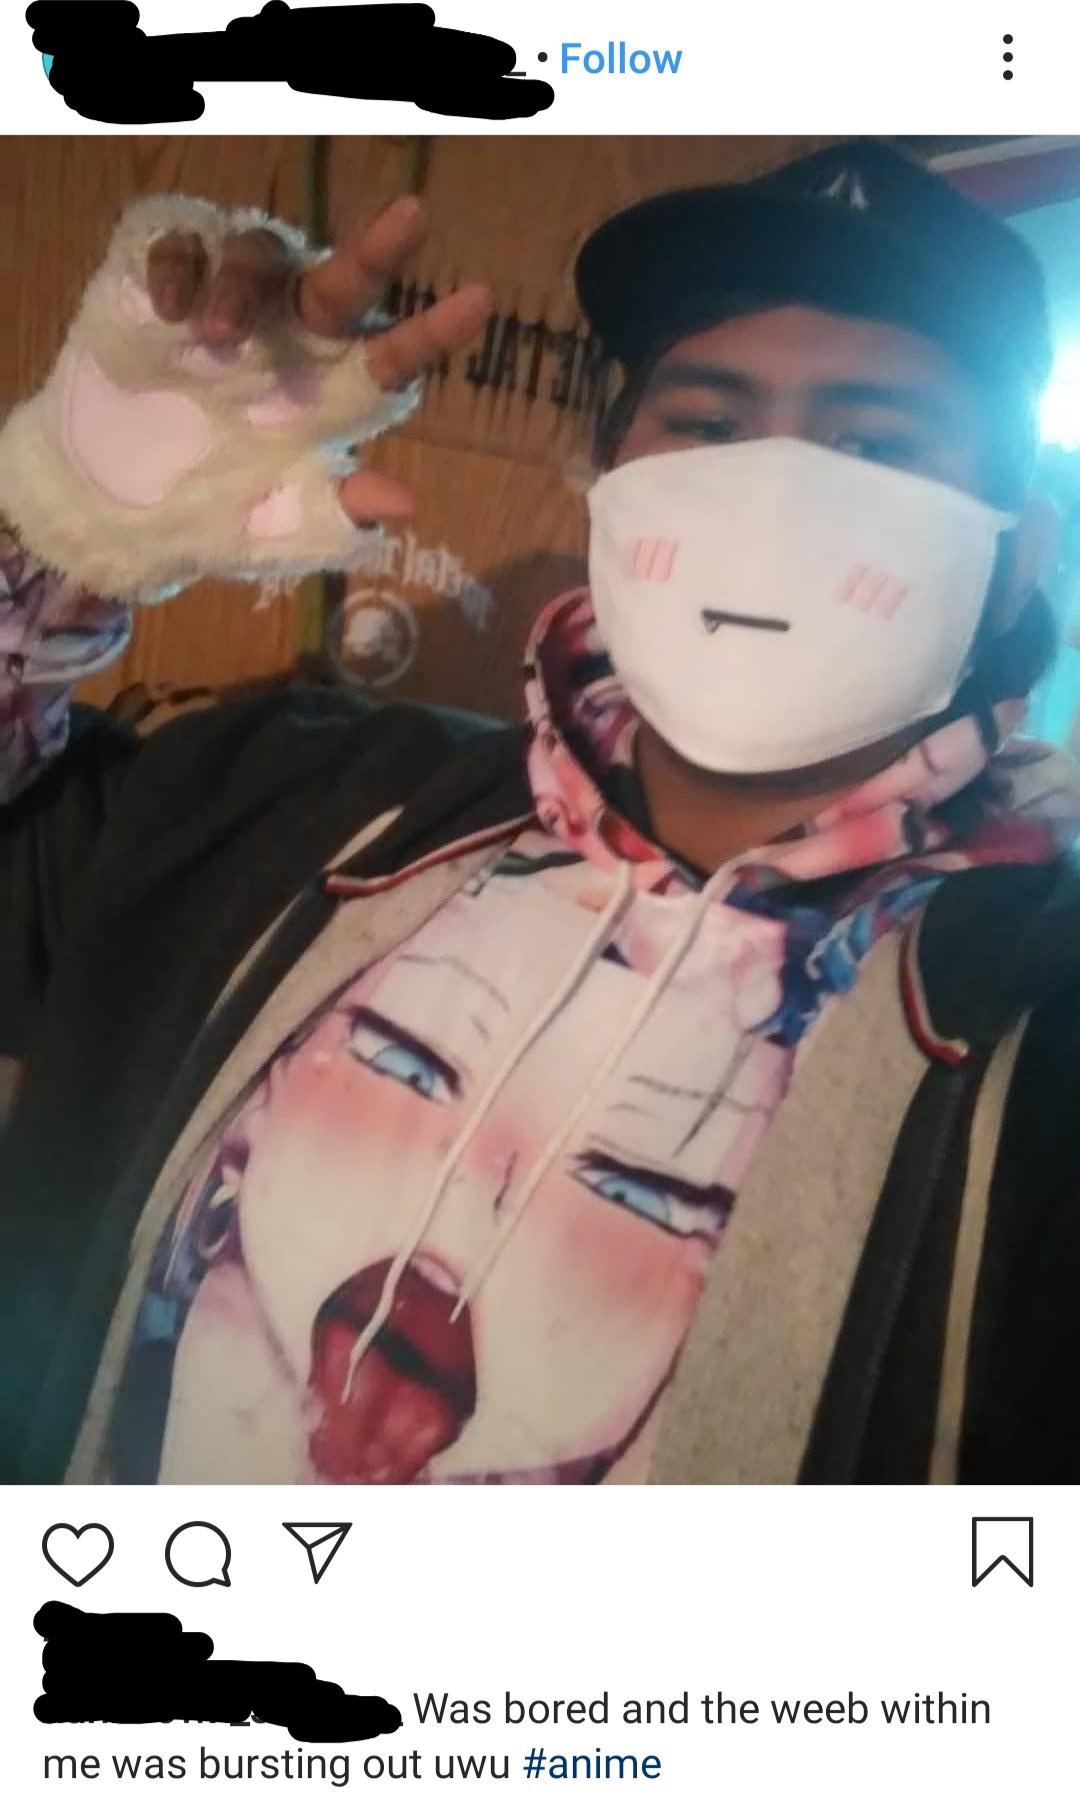 cringe pics - Was bored and the weeb within me was bursting out uwu